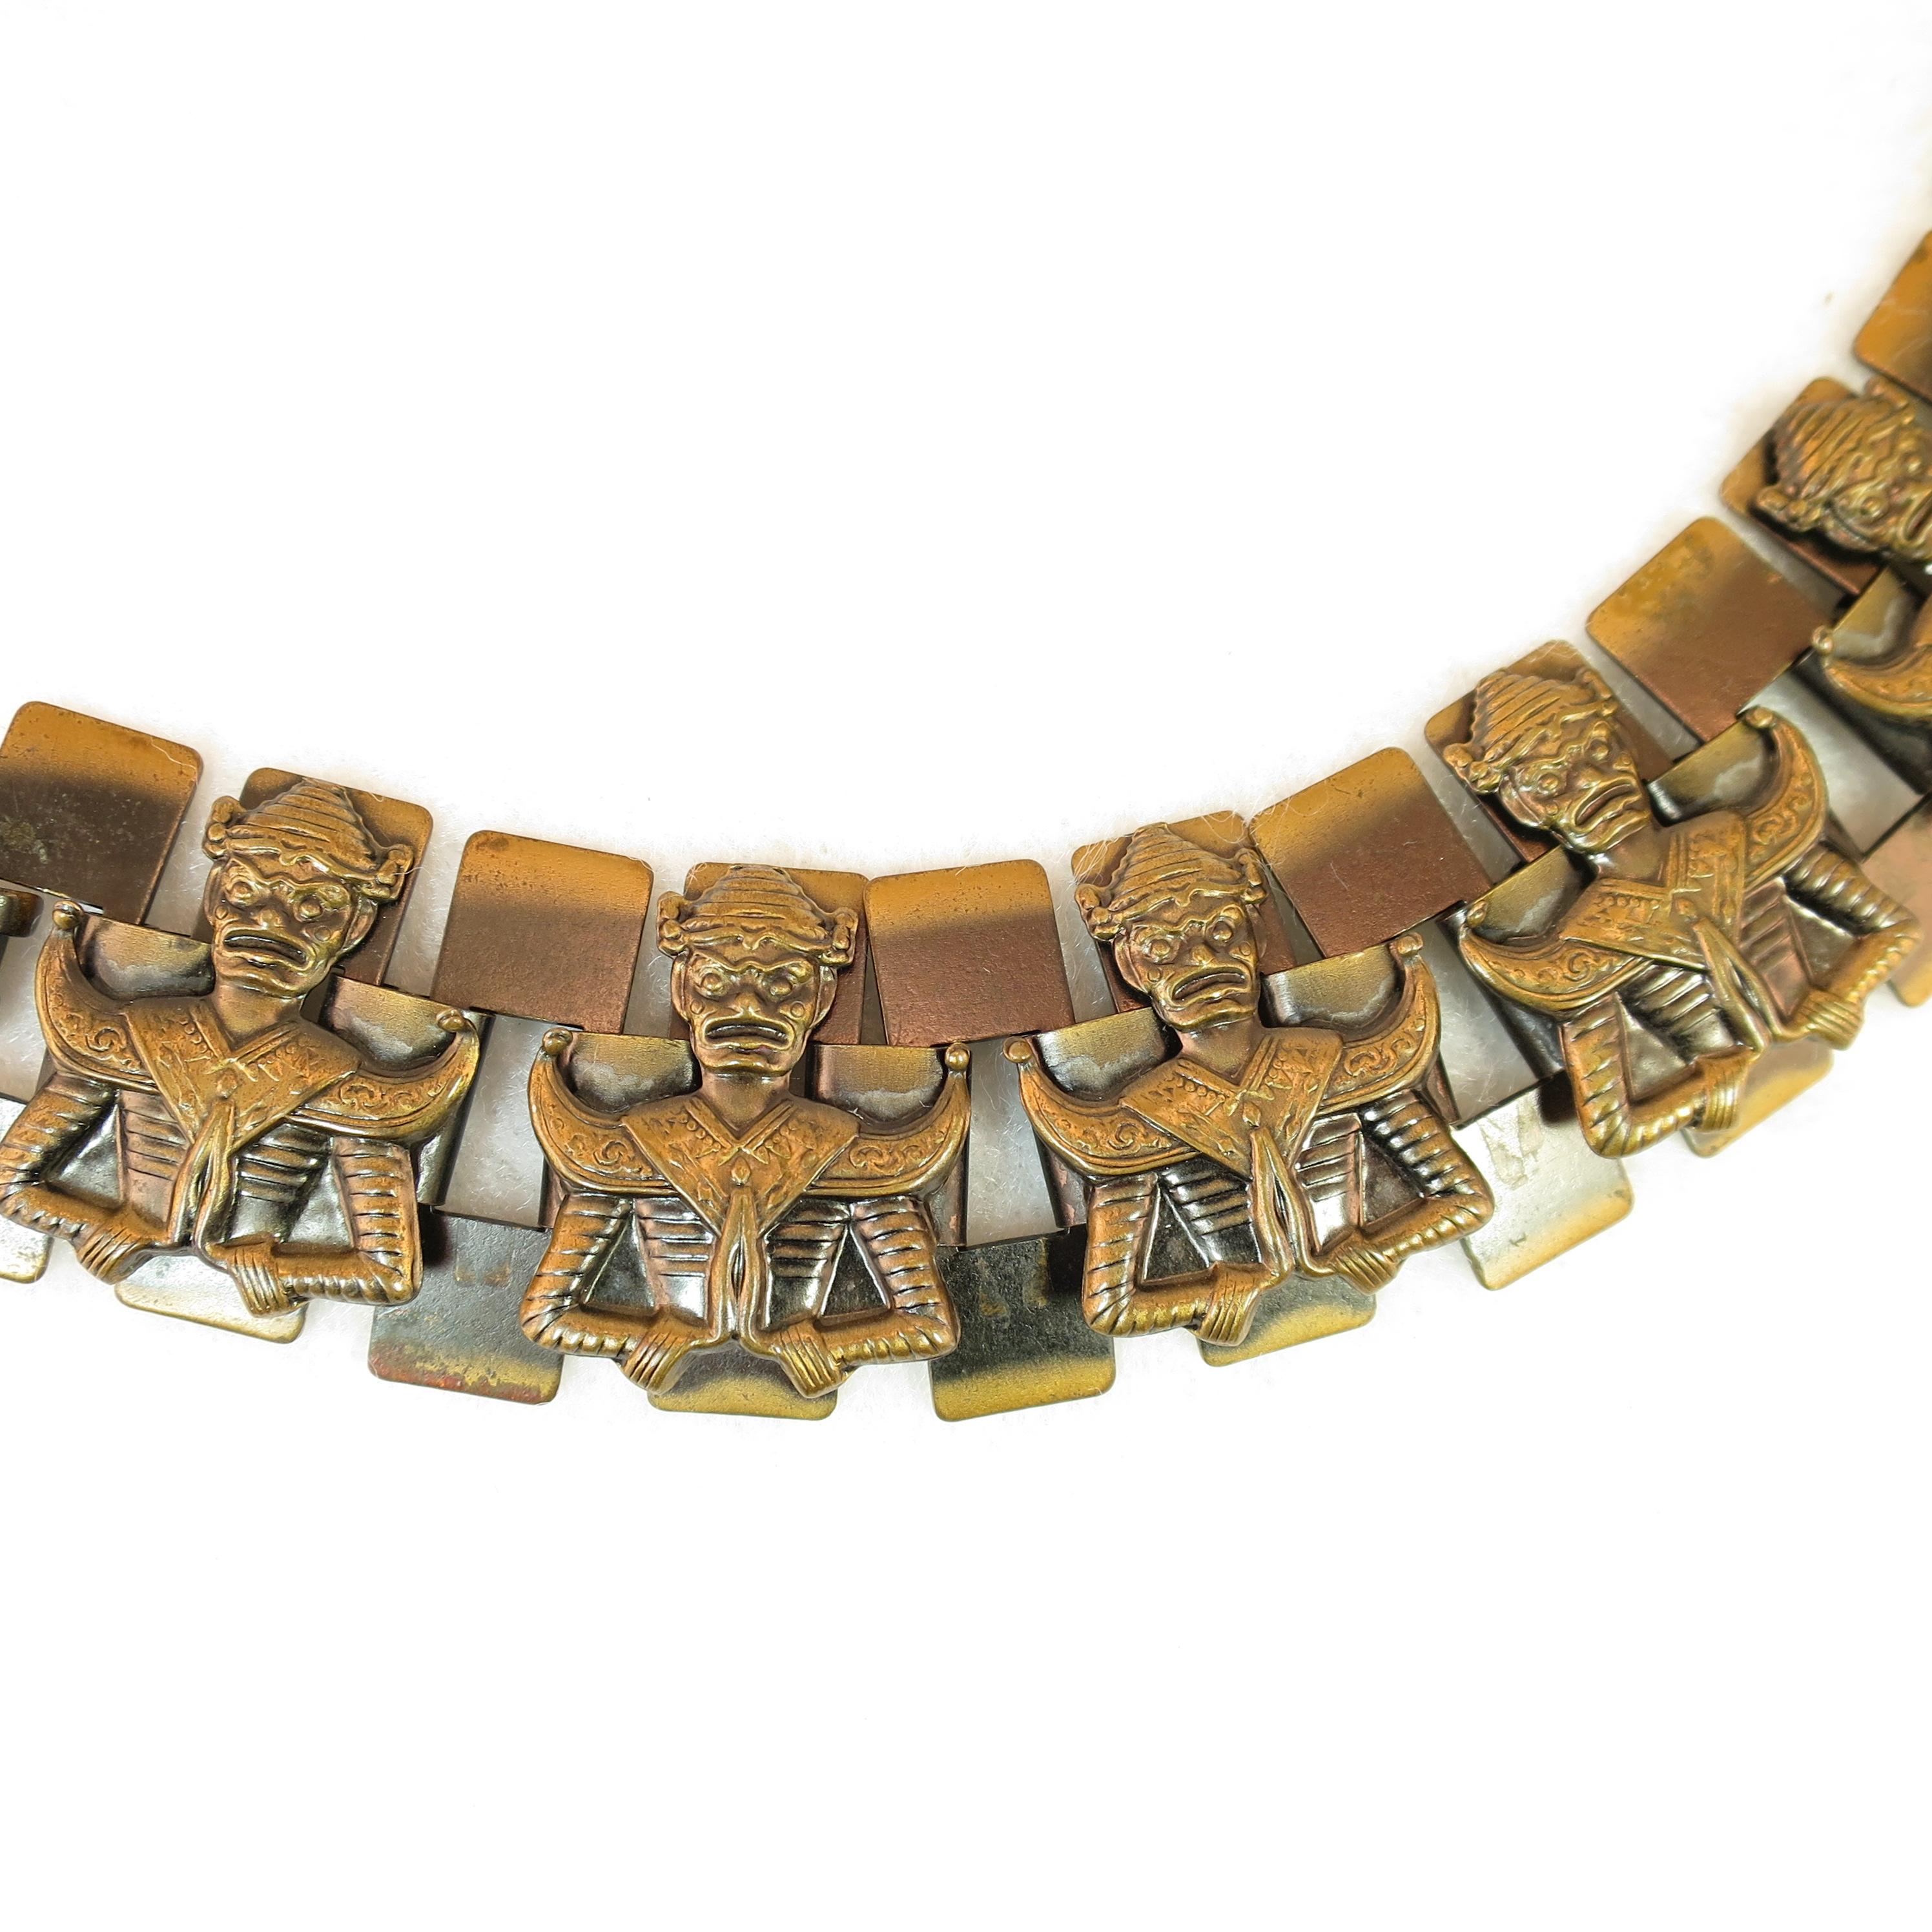 Offered here is a Mid-Century Modern antiqued copper bracelet from the 1950s. This supple linked bracelet consists of rectangular panels with open centers, joined by wide flattened connectors. Atop alternating links are three-dimensional raised